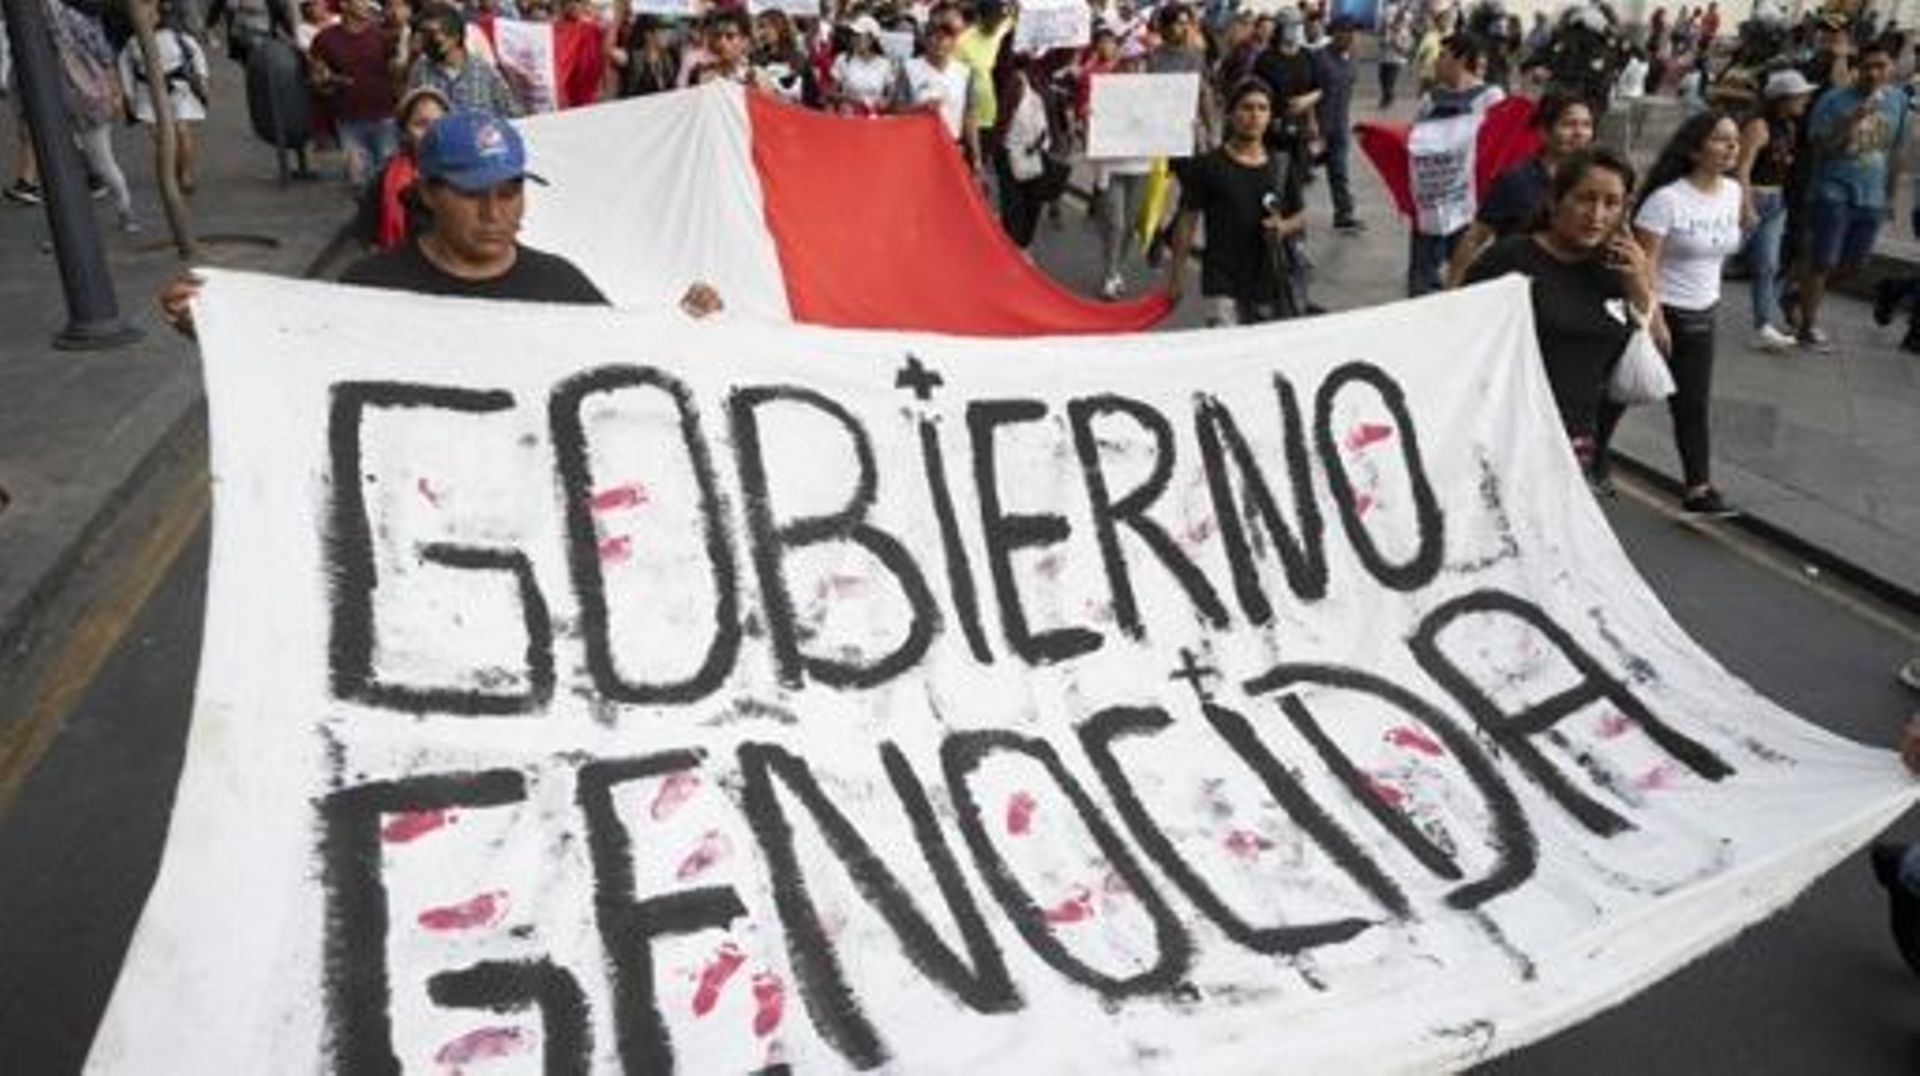 People march during a demonstration against the government of Peruvian President Dina Boluarte calling for her resignation and the closure of Congress in Lima on February 4, 2023. Hundreds of protesters gathered at the accesses to Lima to attend a march t